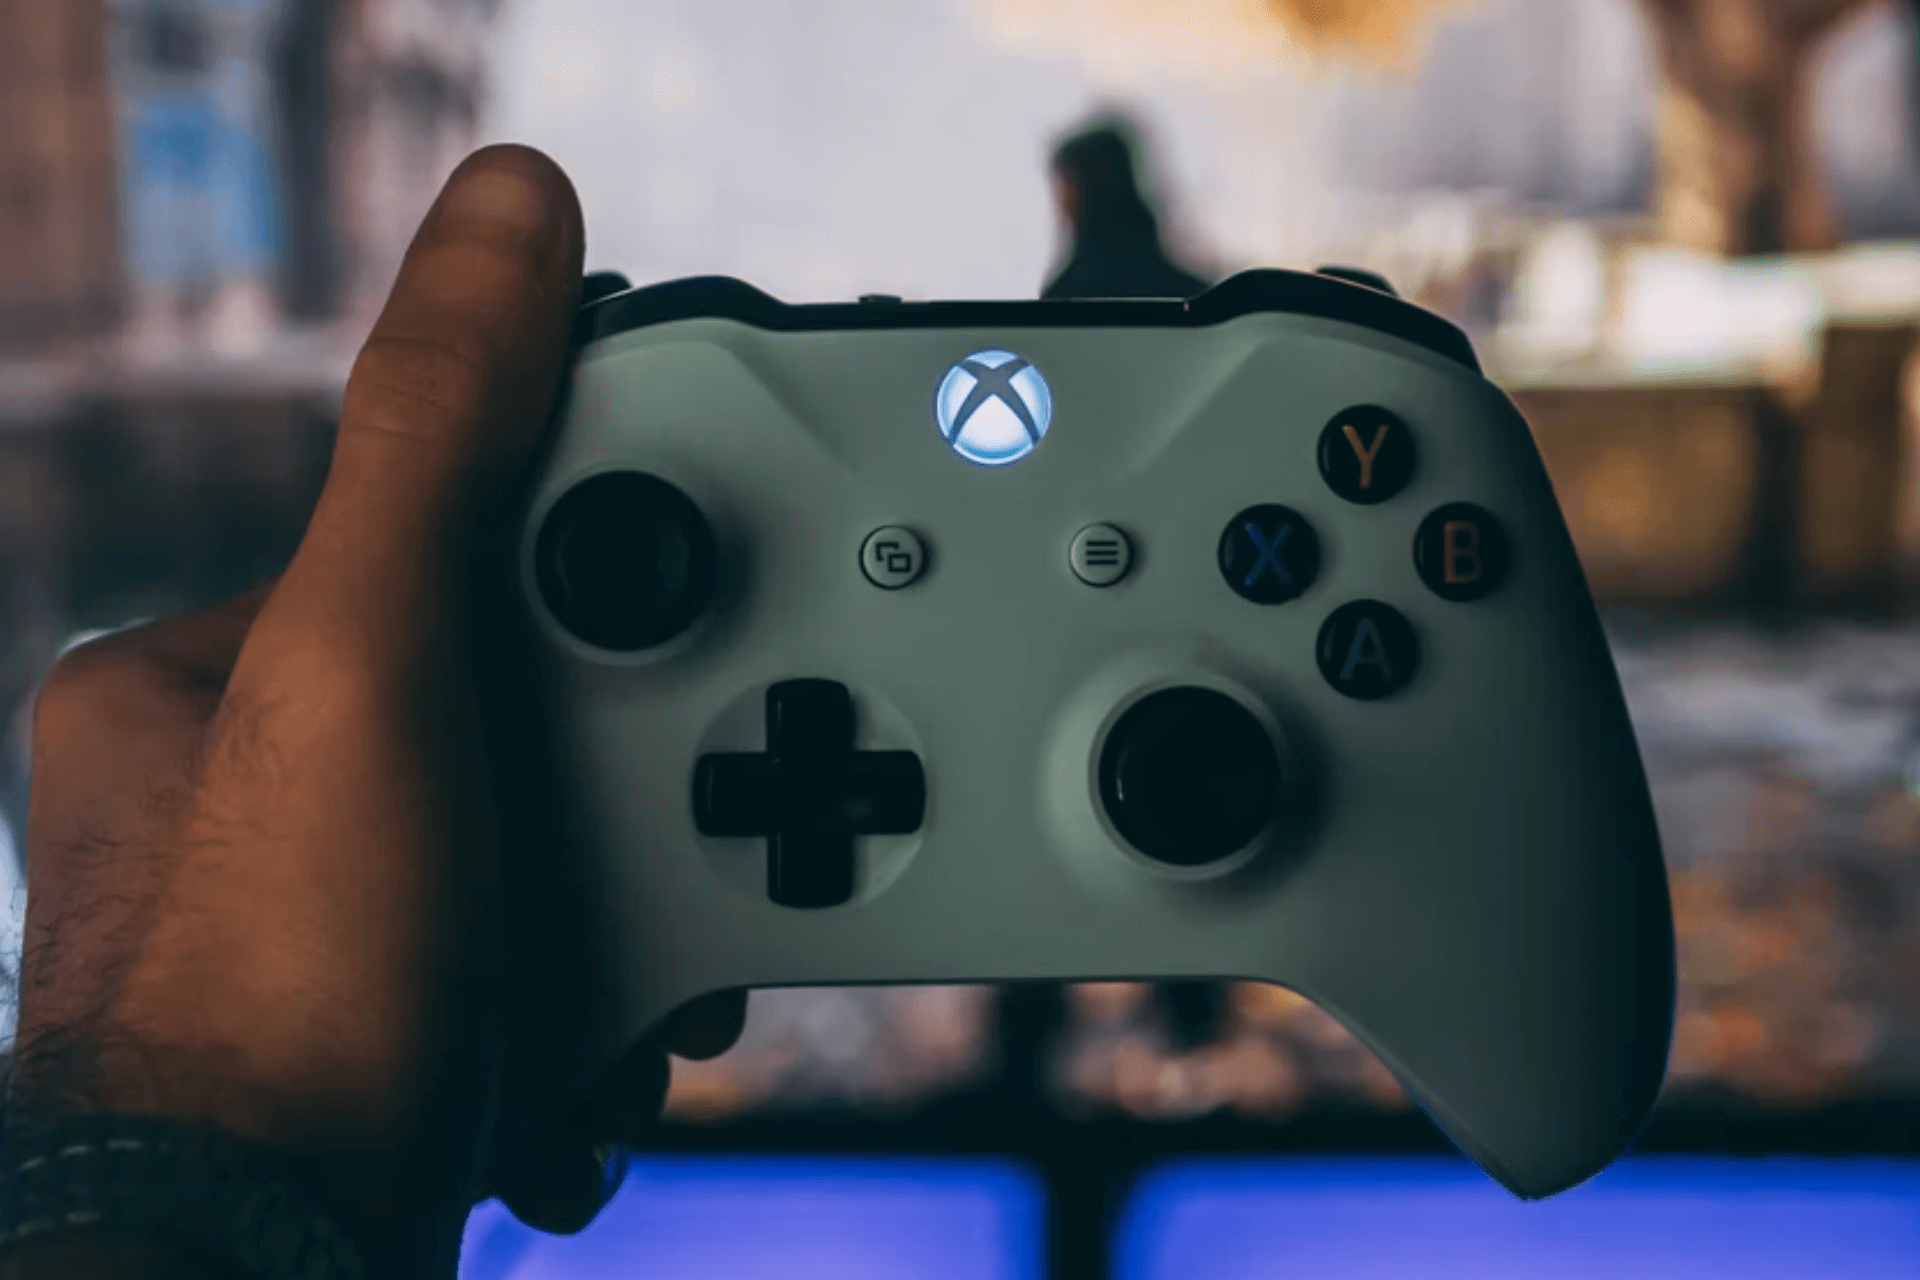 These Xbox Statistics You Won’t Believe at First